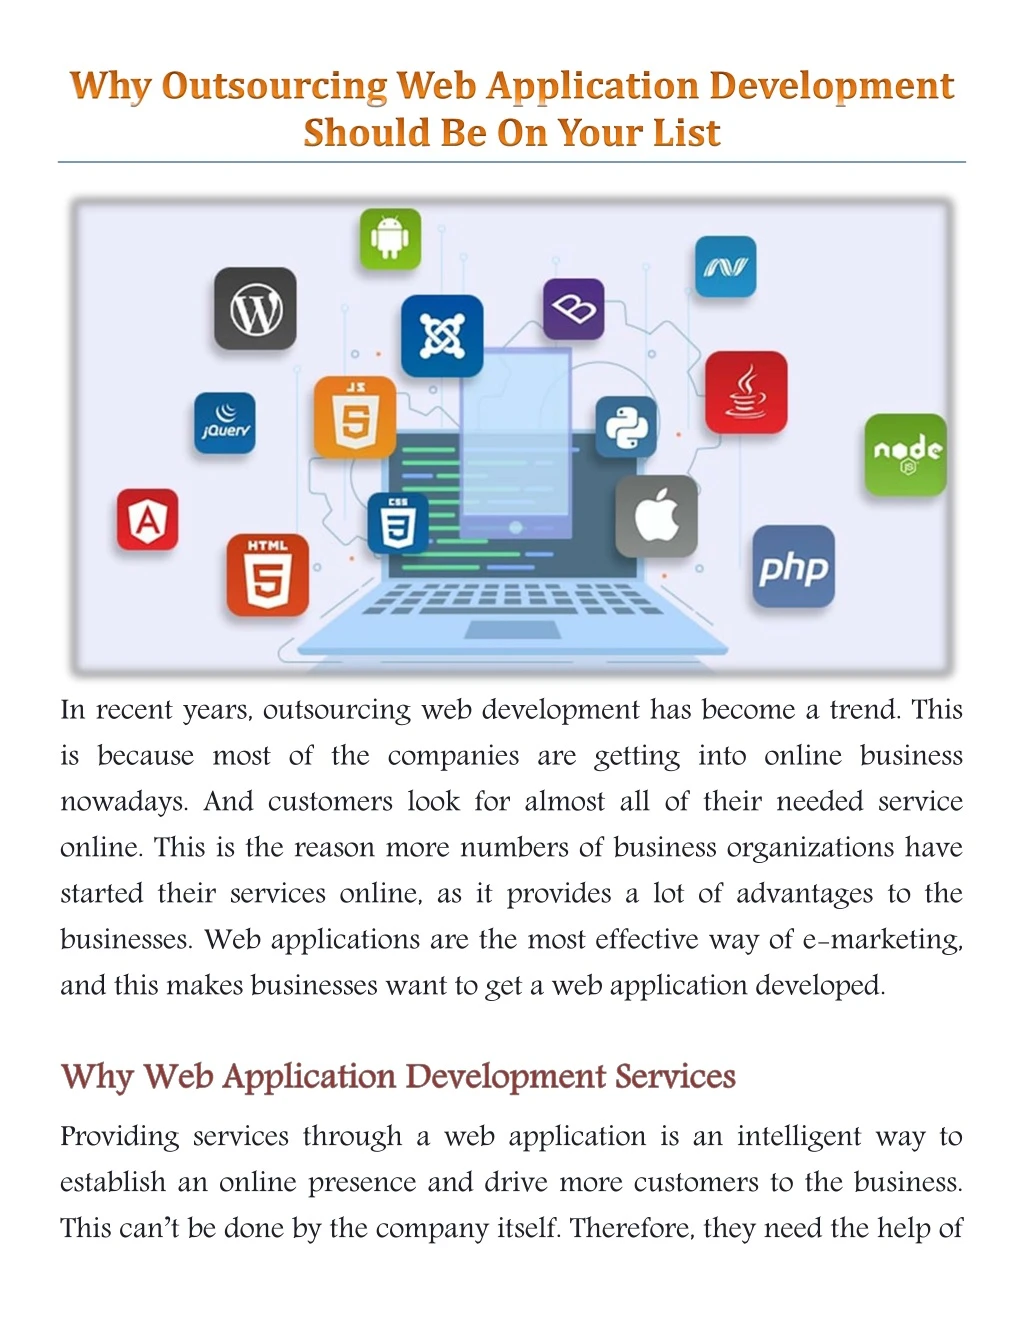 in recent years outsourcing web development